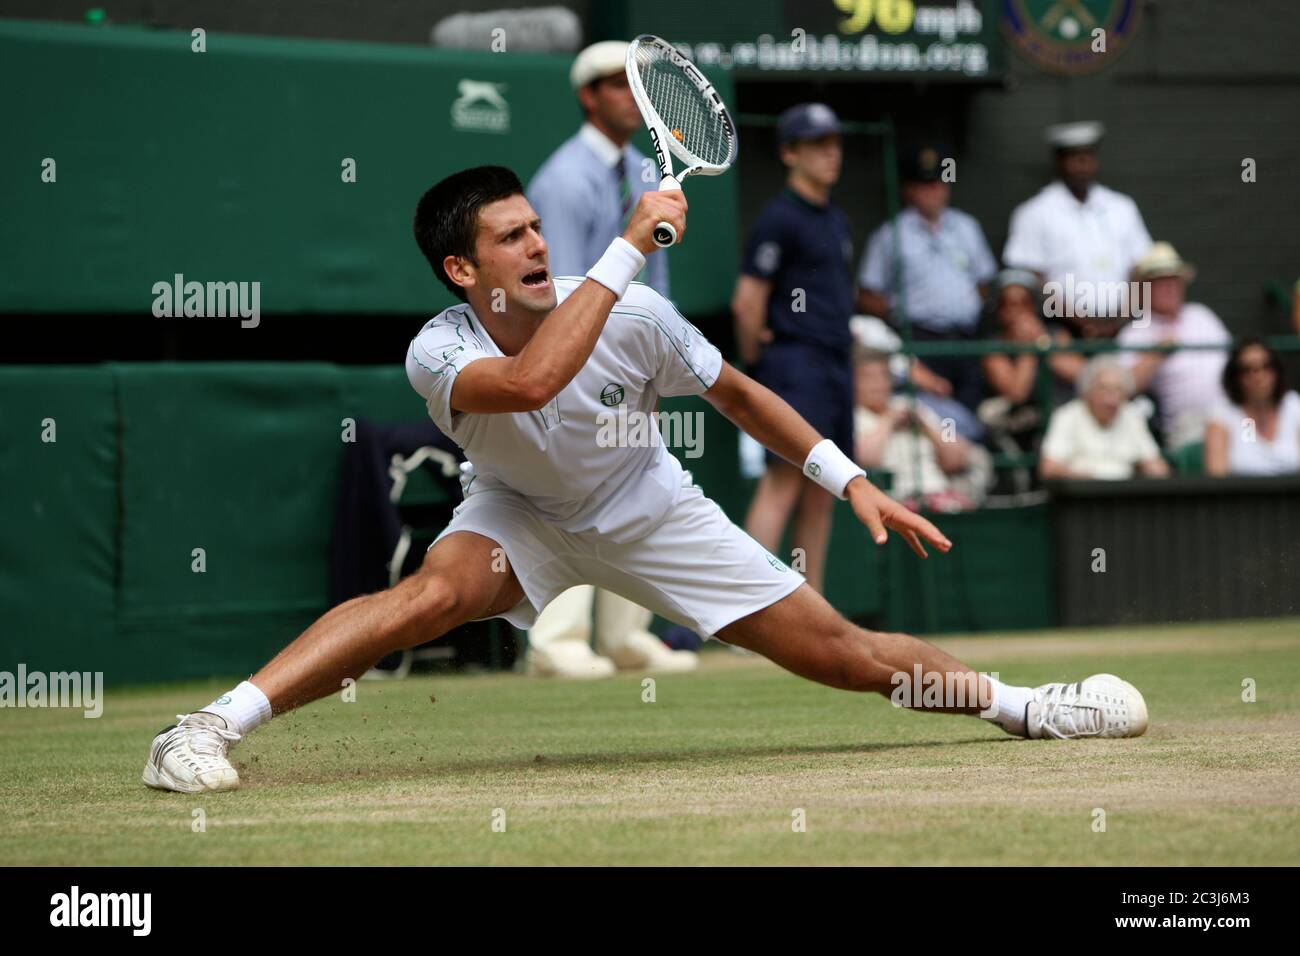 Novak Djokovic reaches wide for a forehand during his his semi-final match against Tomas Berdych at Wimbledon. Stock Photo